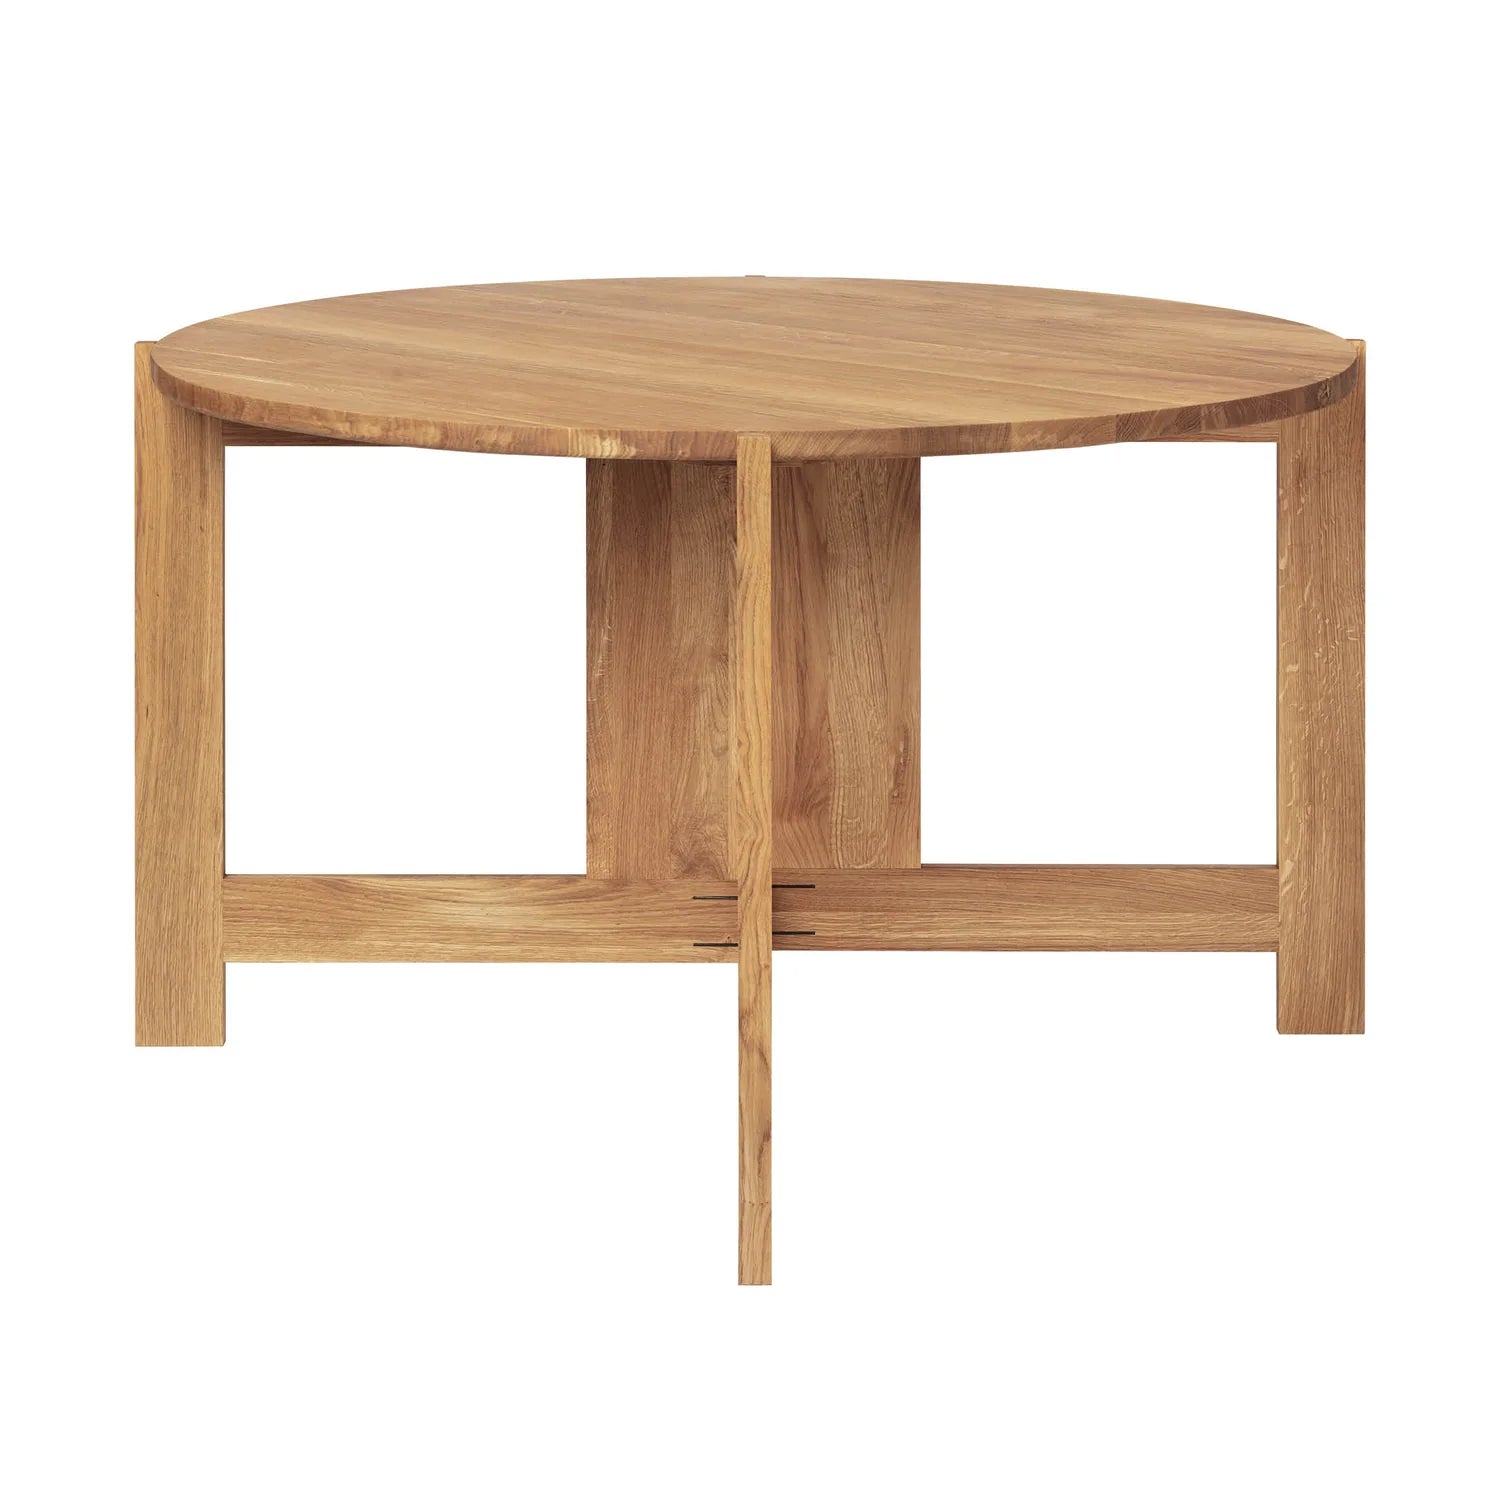 Round table in solid oak